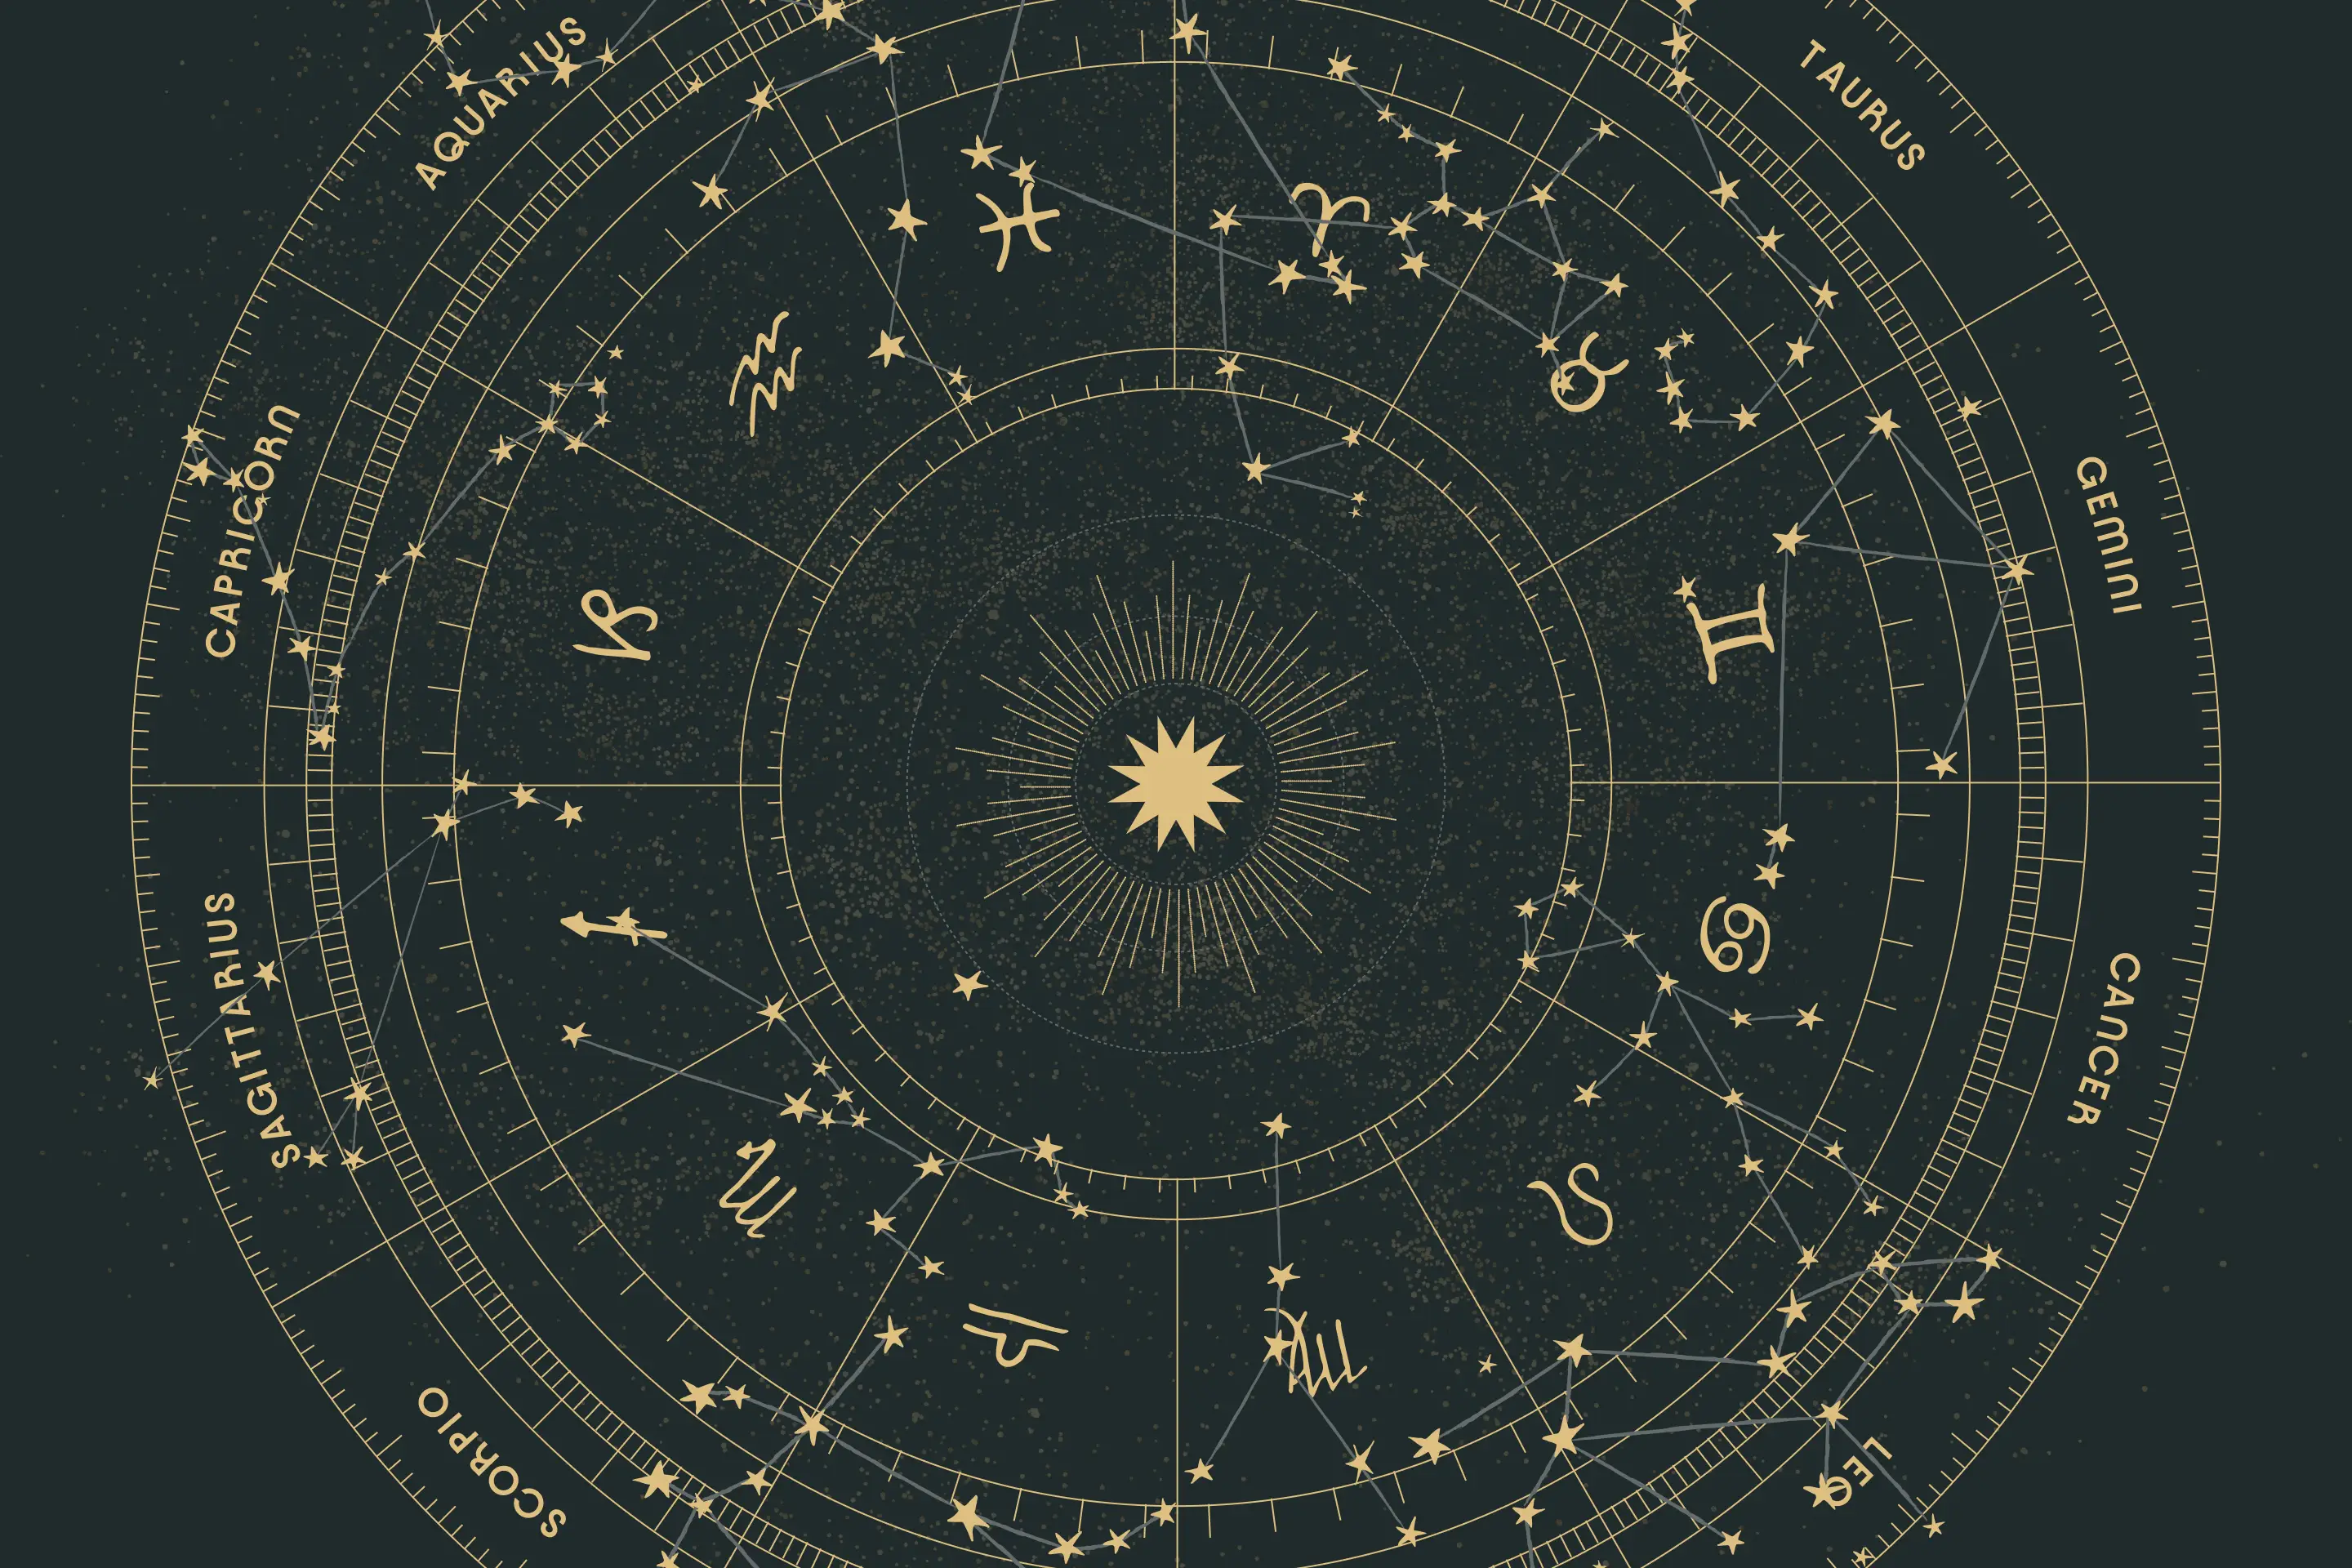 Astrology 101: Zodiac Signs, Houses, Elements, Planets